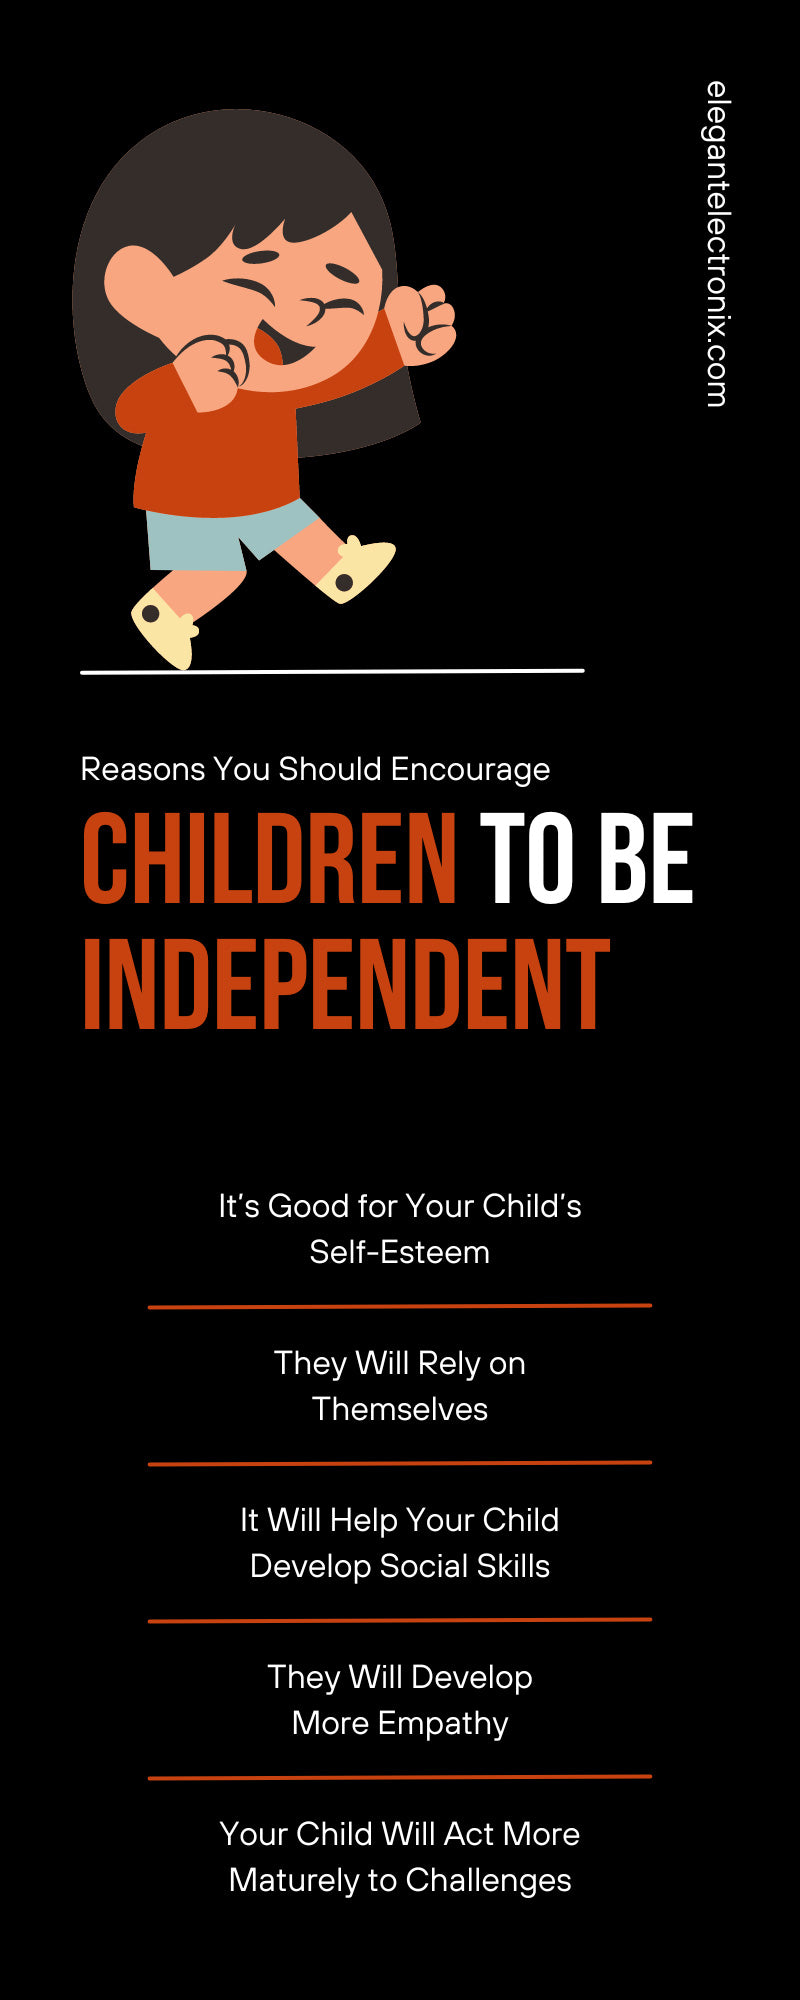 Reasons You Should Encourage Children To Be Independent